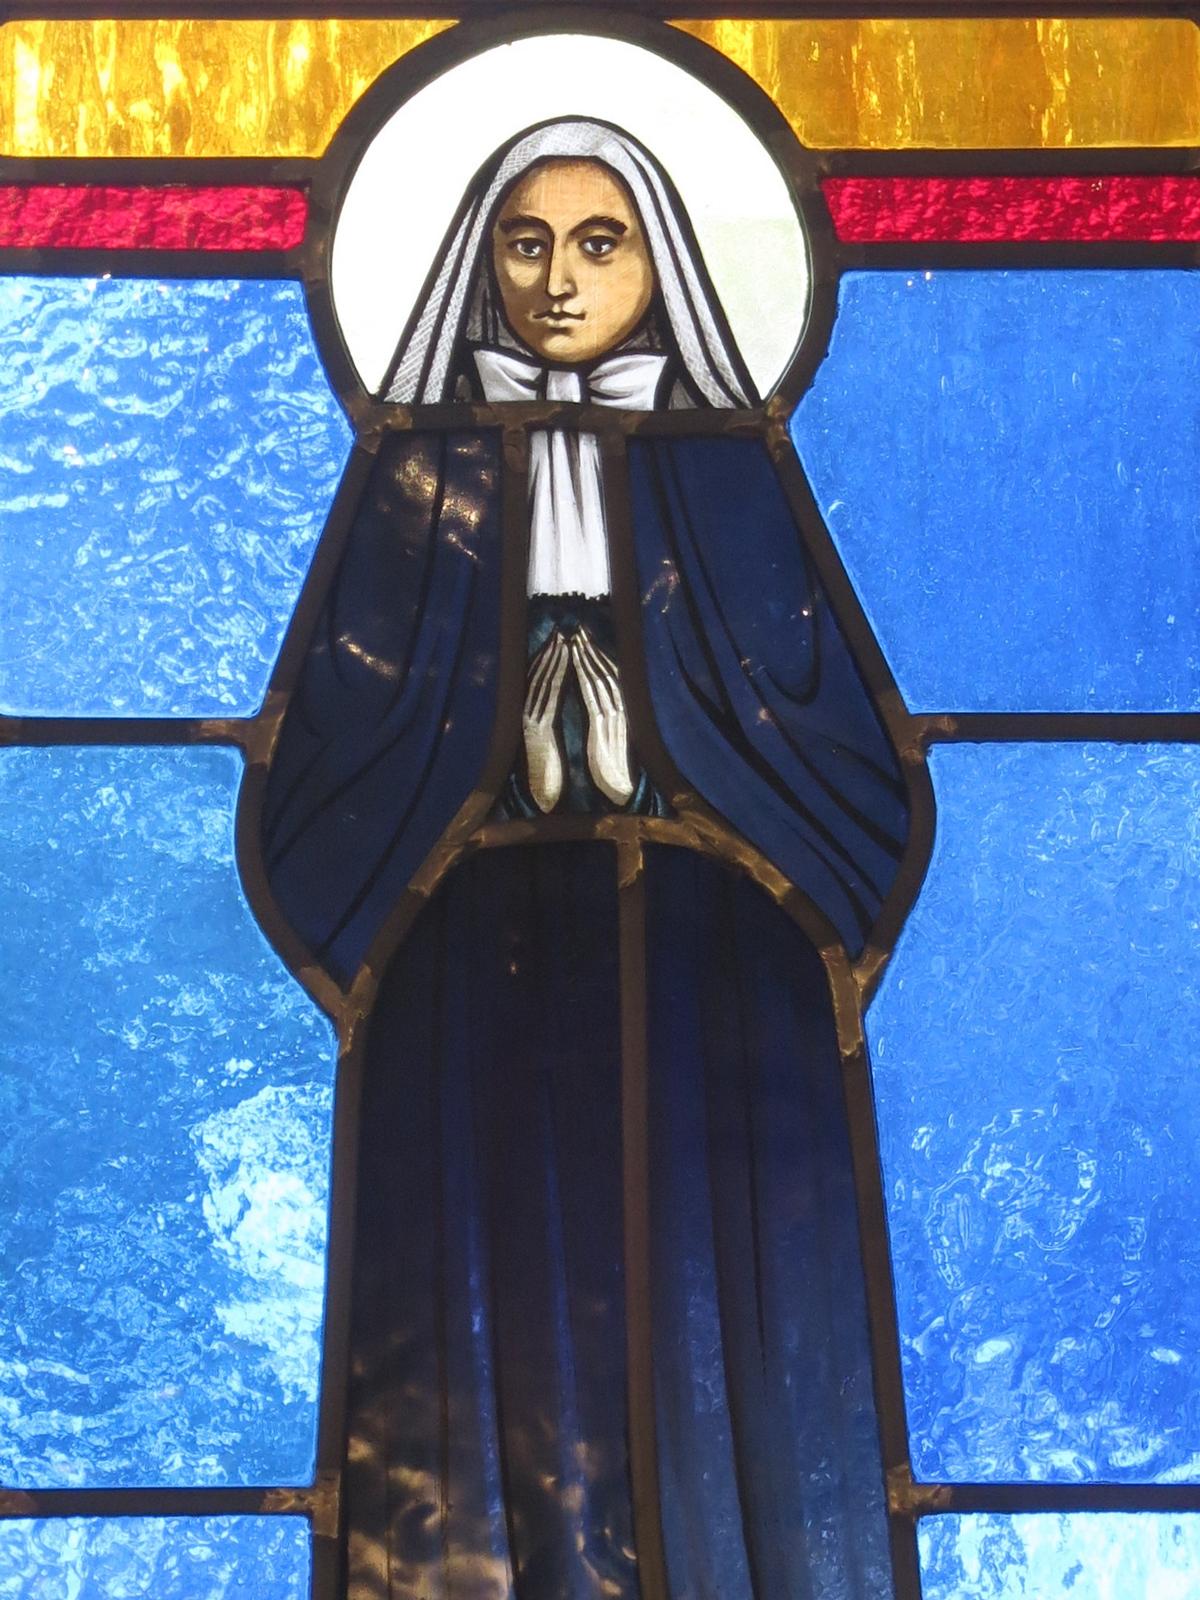 Stained glass window of St. Frances Xavier Cabrini